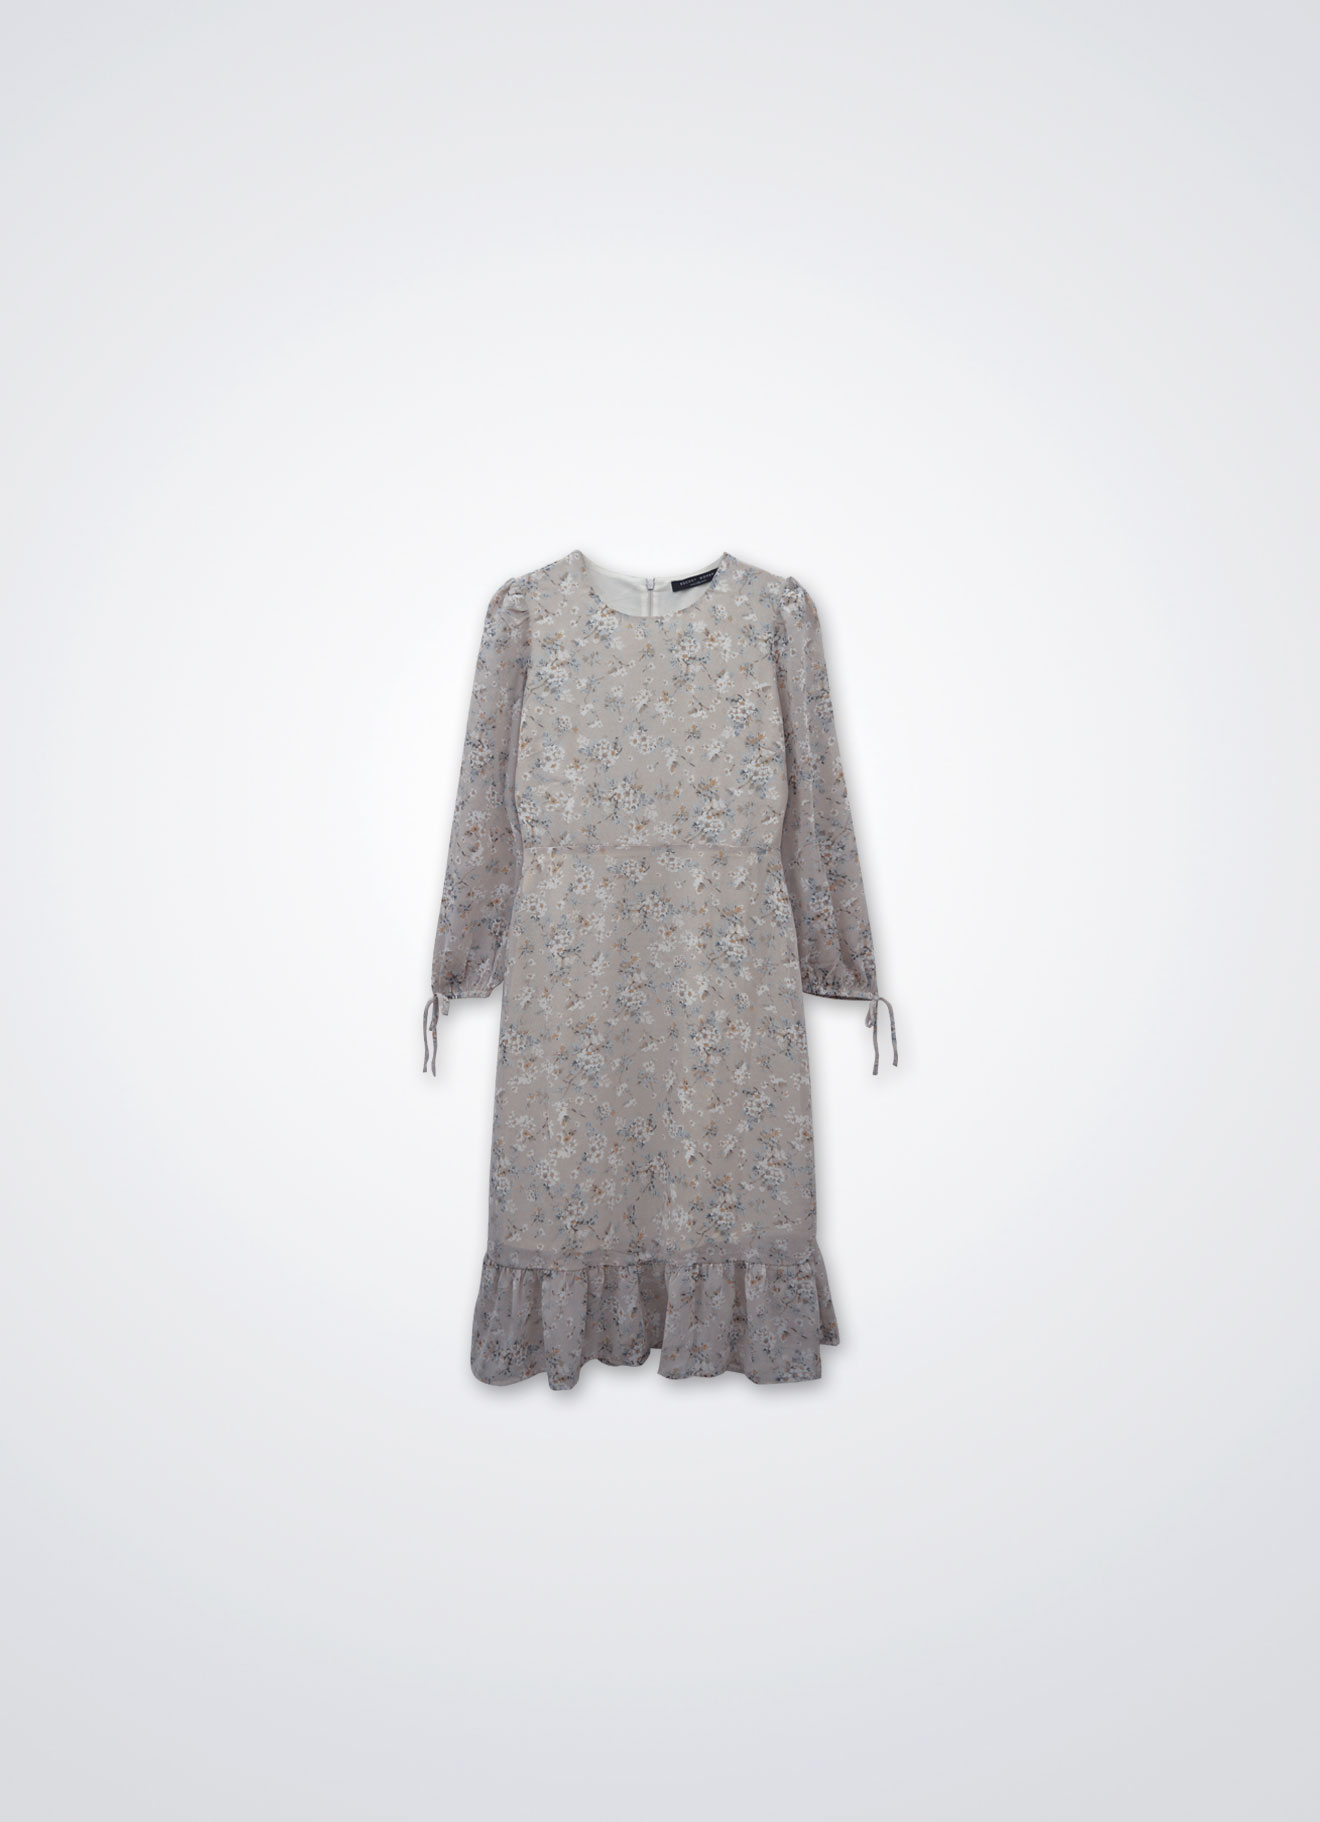 Crystal-Gray by Floral Printed Dress